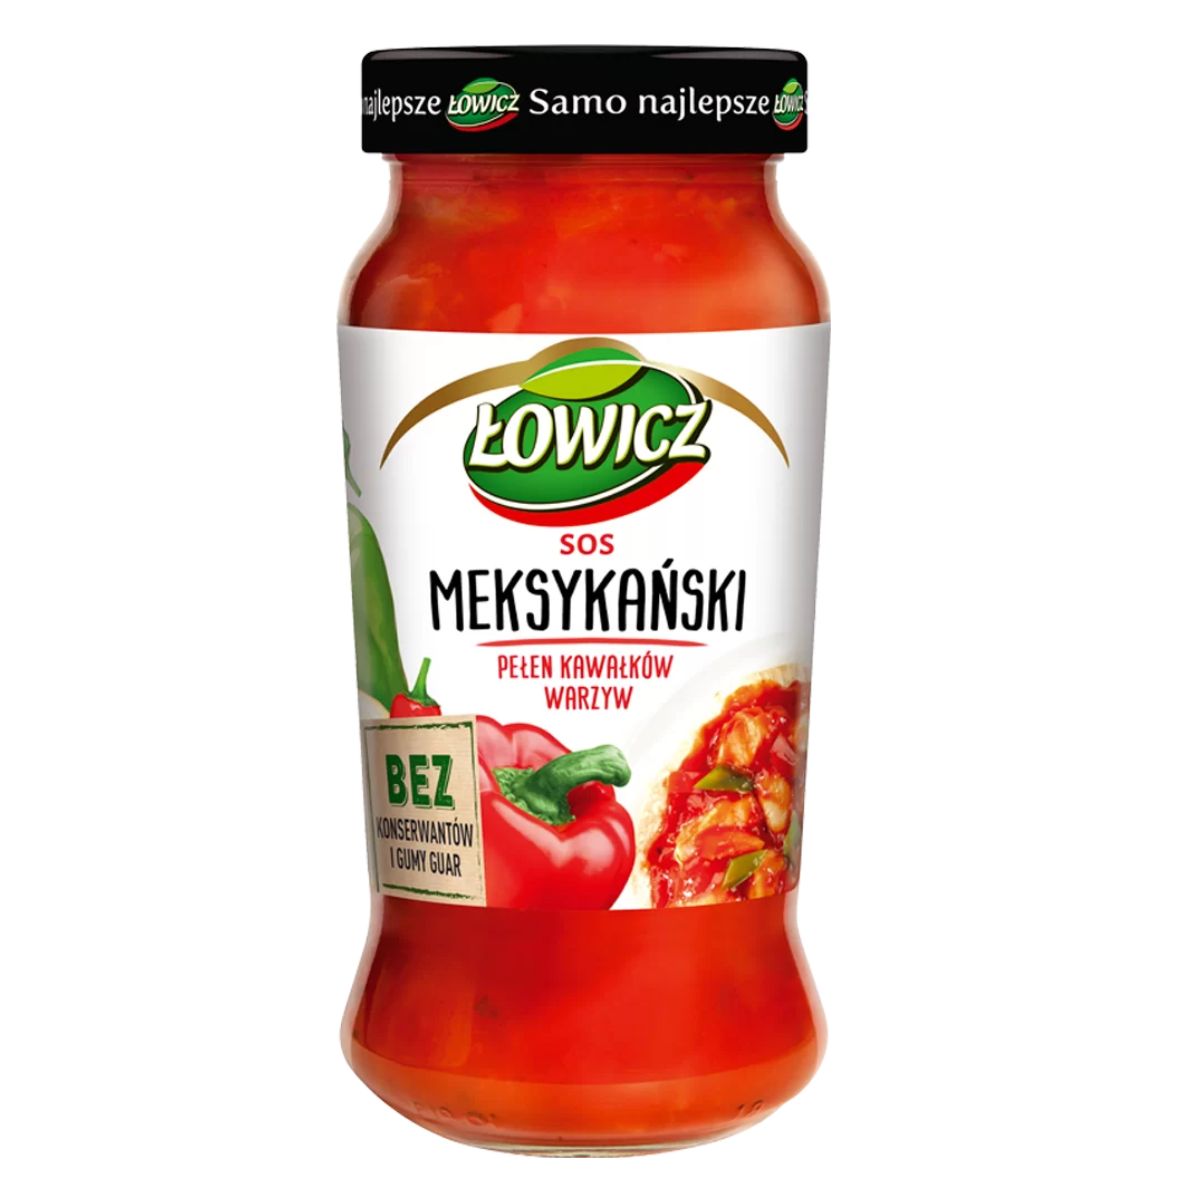 A jar of Lowicz - Mexican Sauce for Spaghetti - 500g with pictures of tomatoes and chili peppers on the label, highlighting no preservatives.